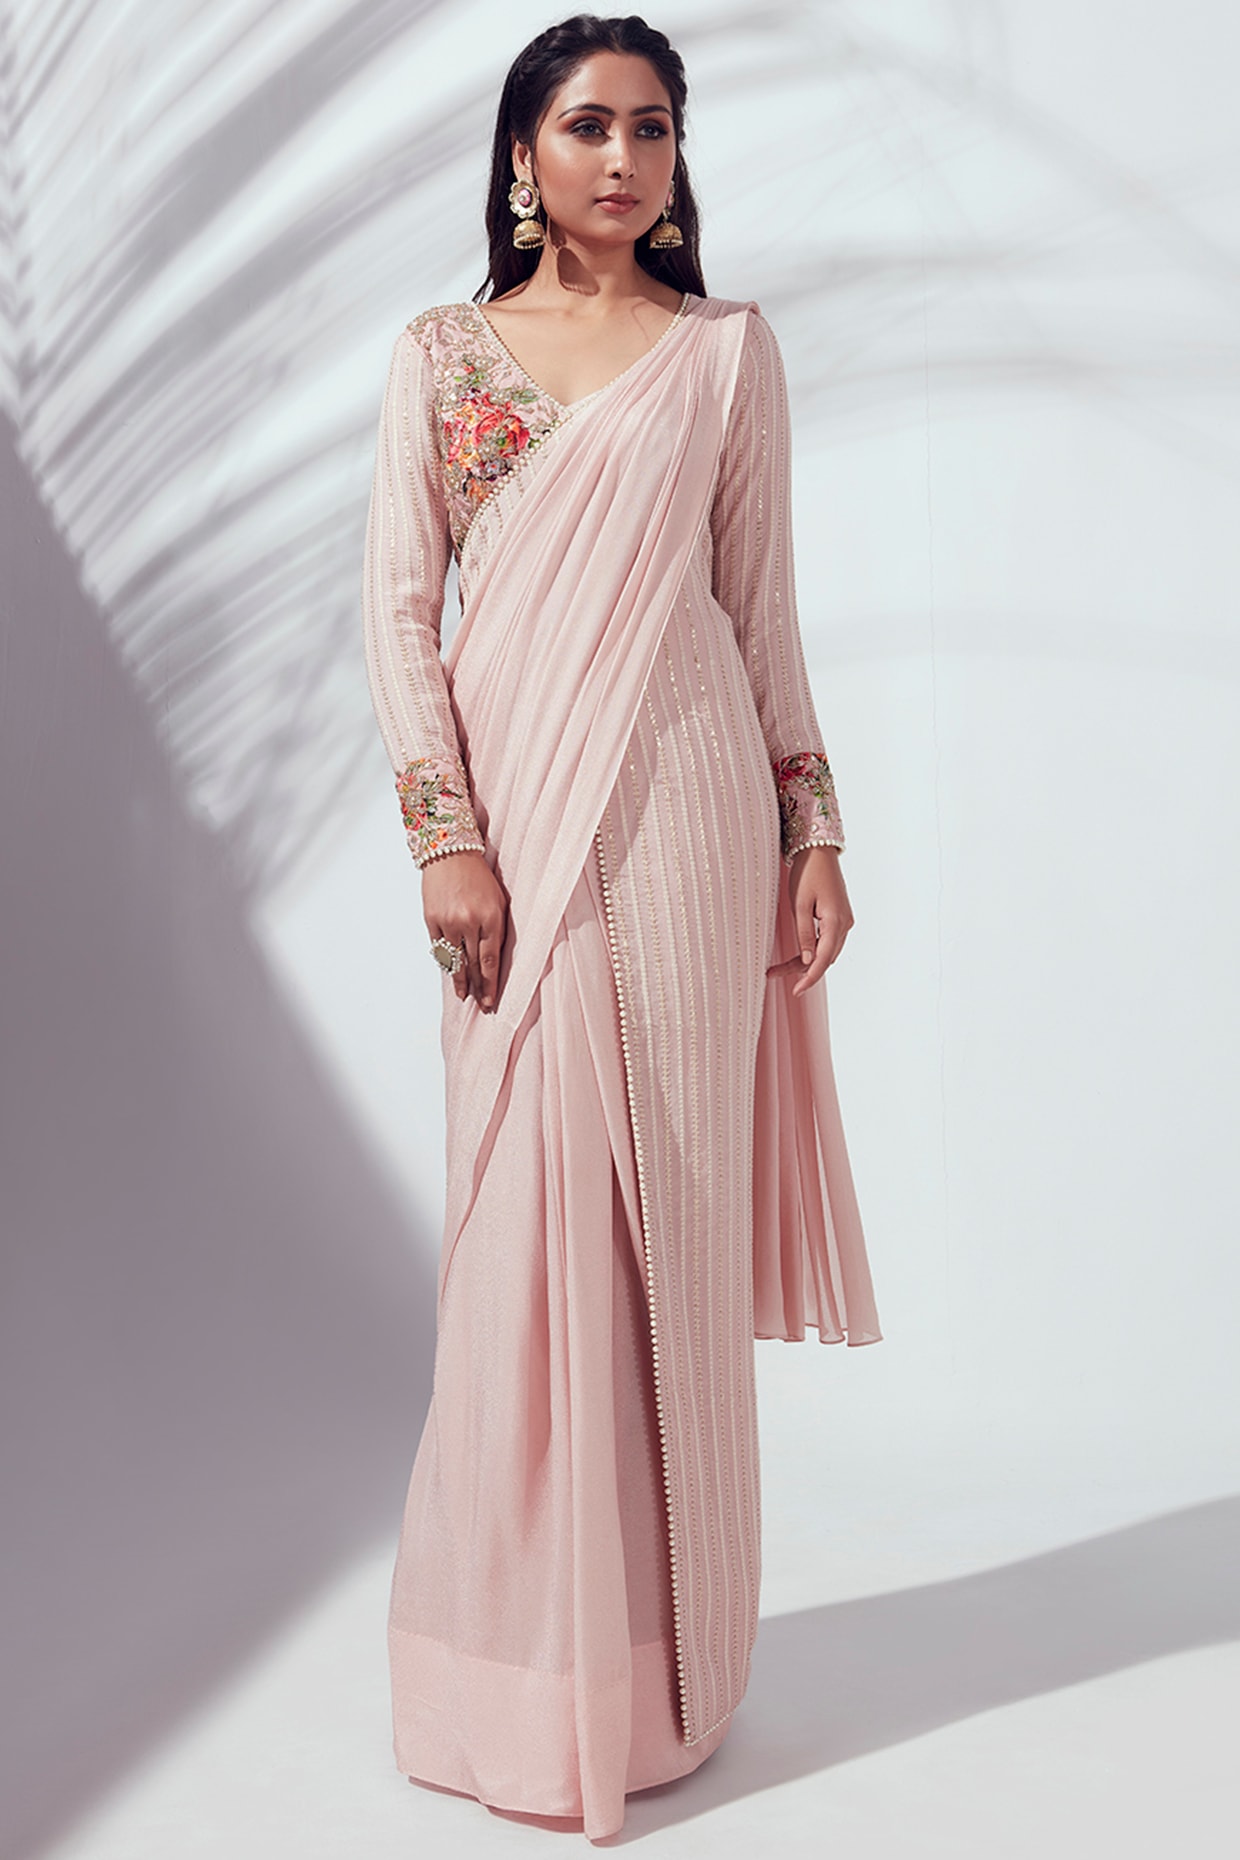 Buy Dhupdi Saree With Ardas Trench Coat by Designer Fishcanfly for Women  online at kaarimarket.com